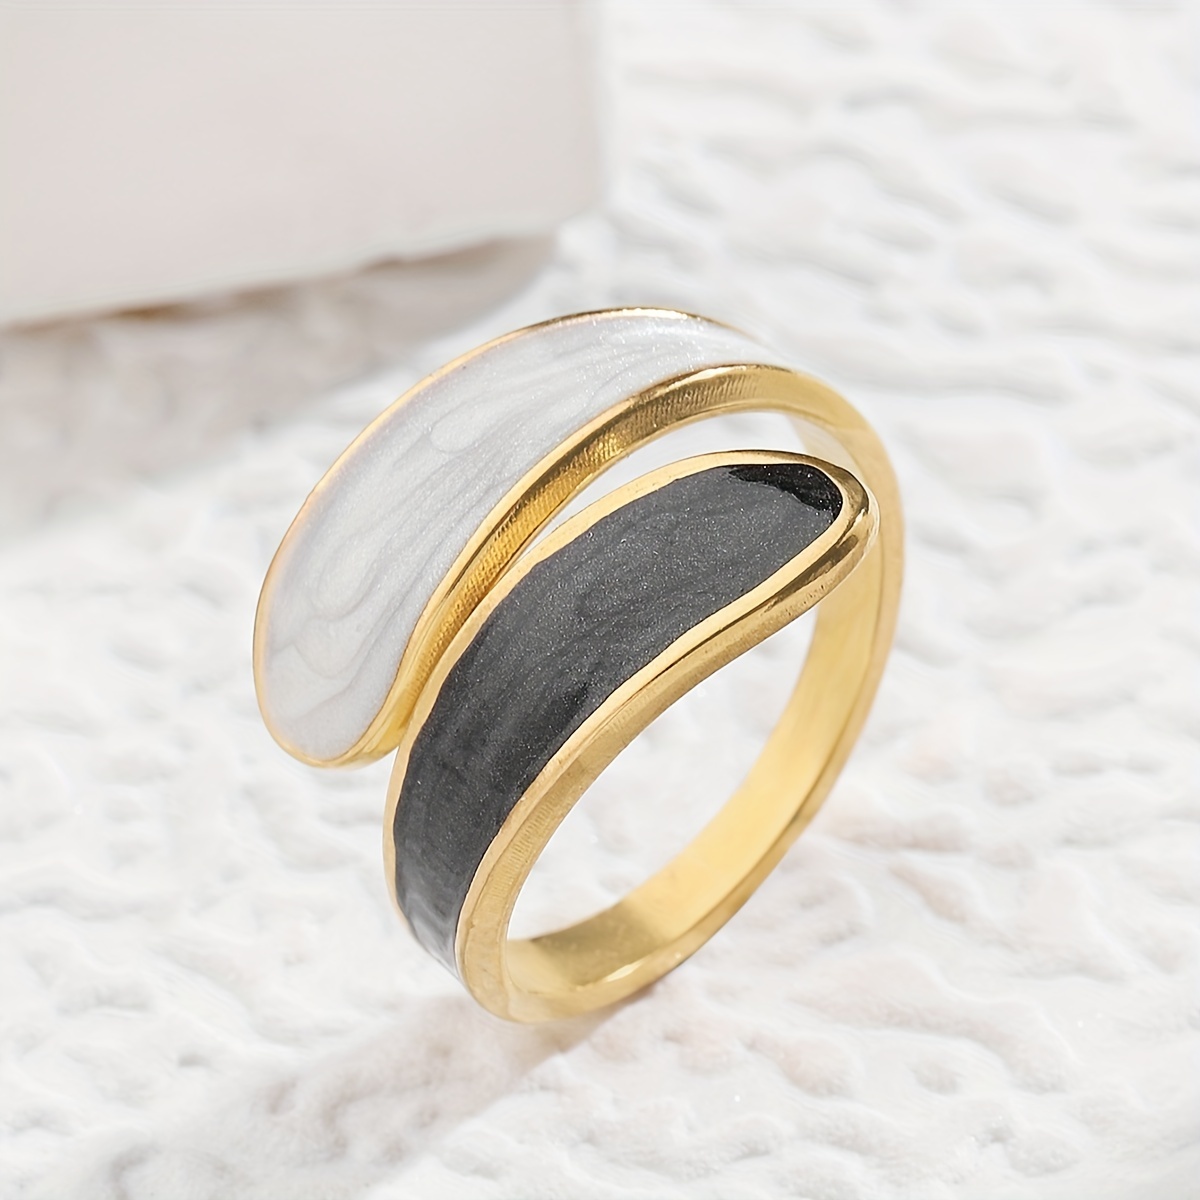 

1pc Golden Stainless Steel Irregularly Shaped Ring, Party Team Combinations And Emotional Change Creative Ring, Friendship Suitable For Both Men And Women